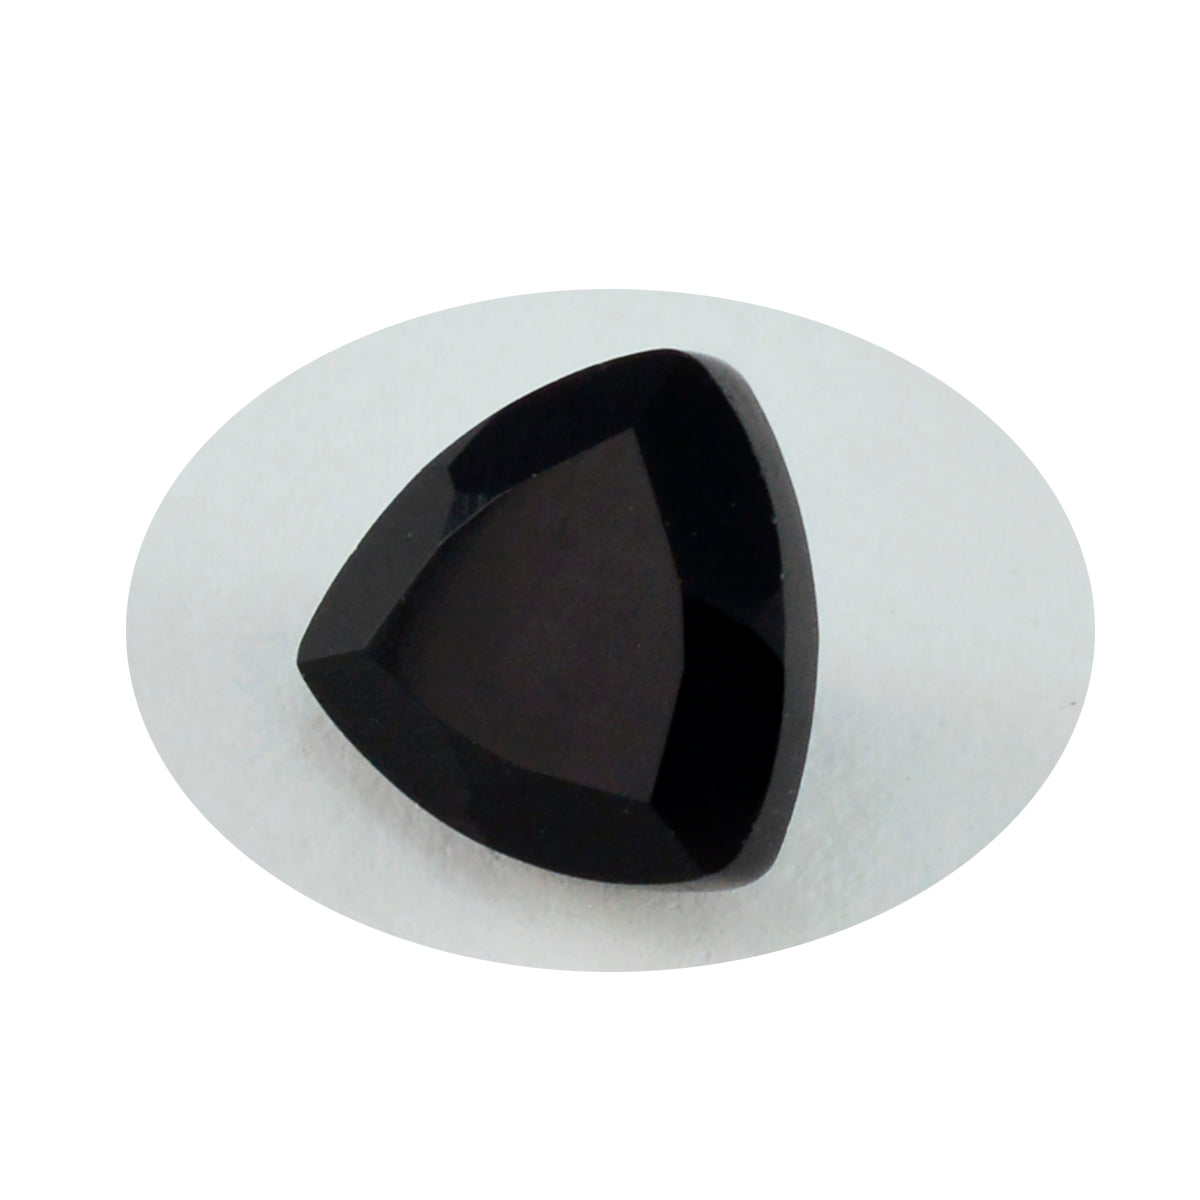 Riyogems 1PC Natural Black Onyx Faceted 10x10 mm Trillion Shape attractive Quality Loose Gems